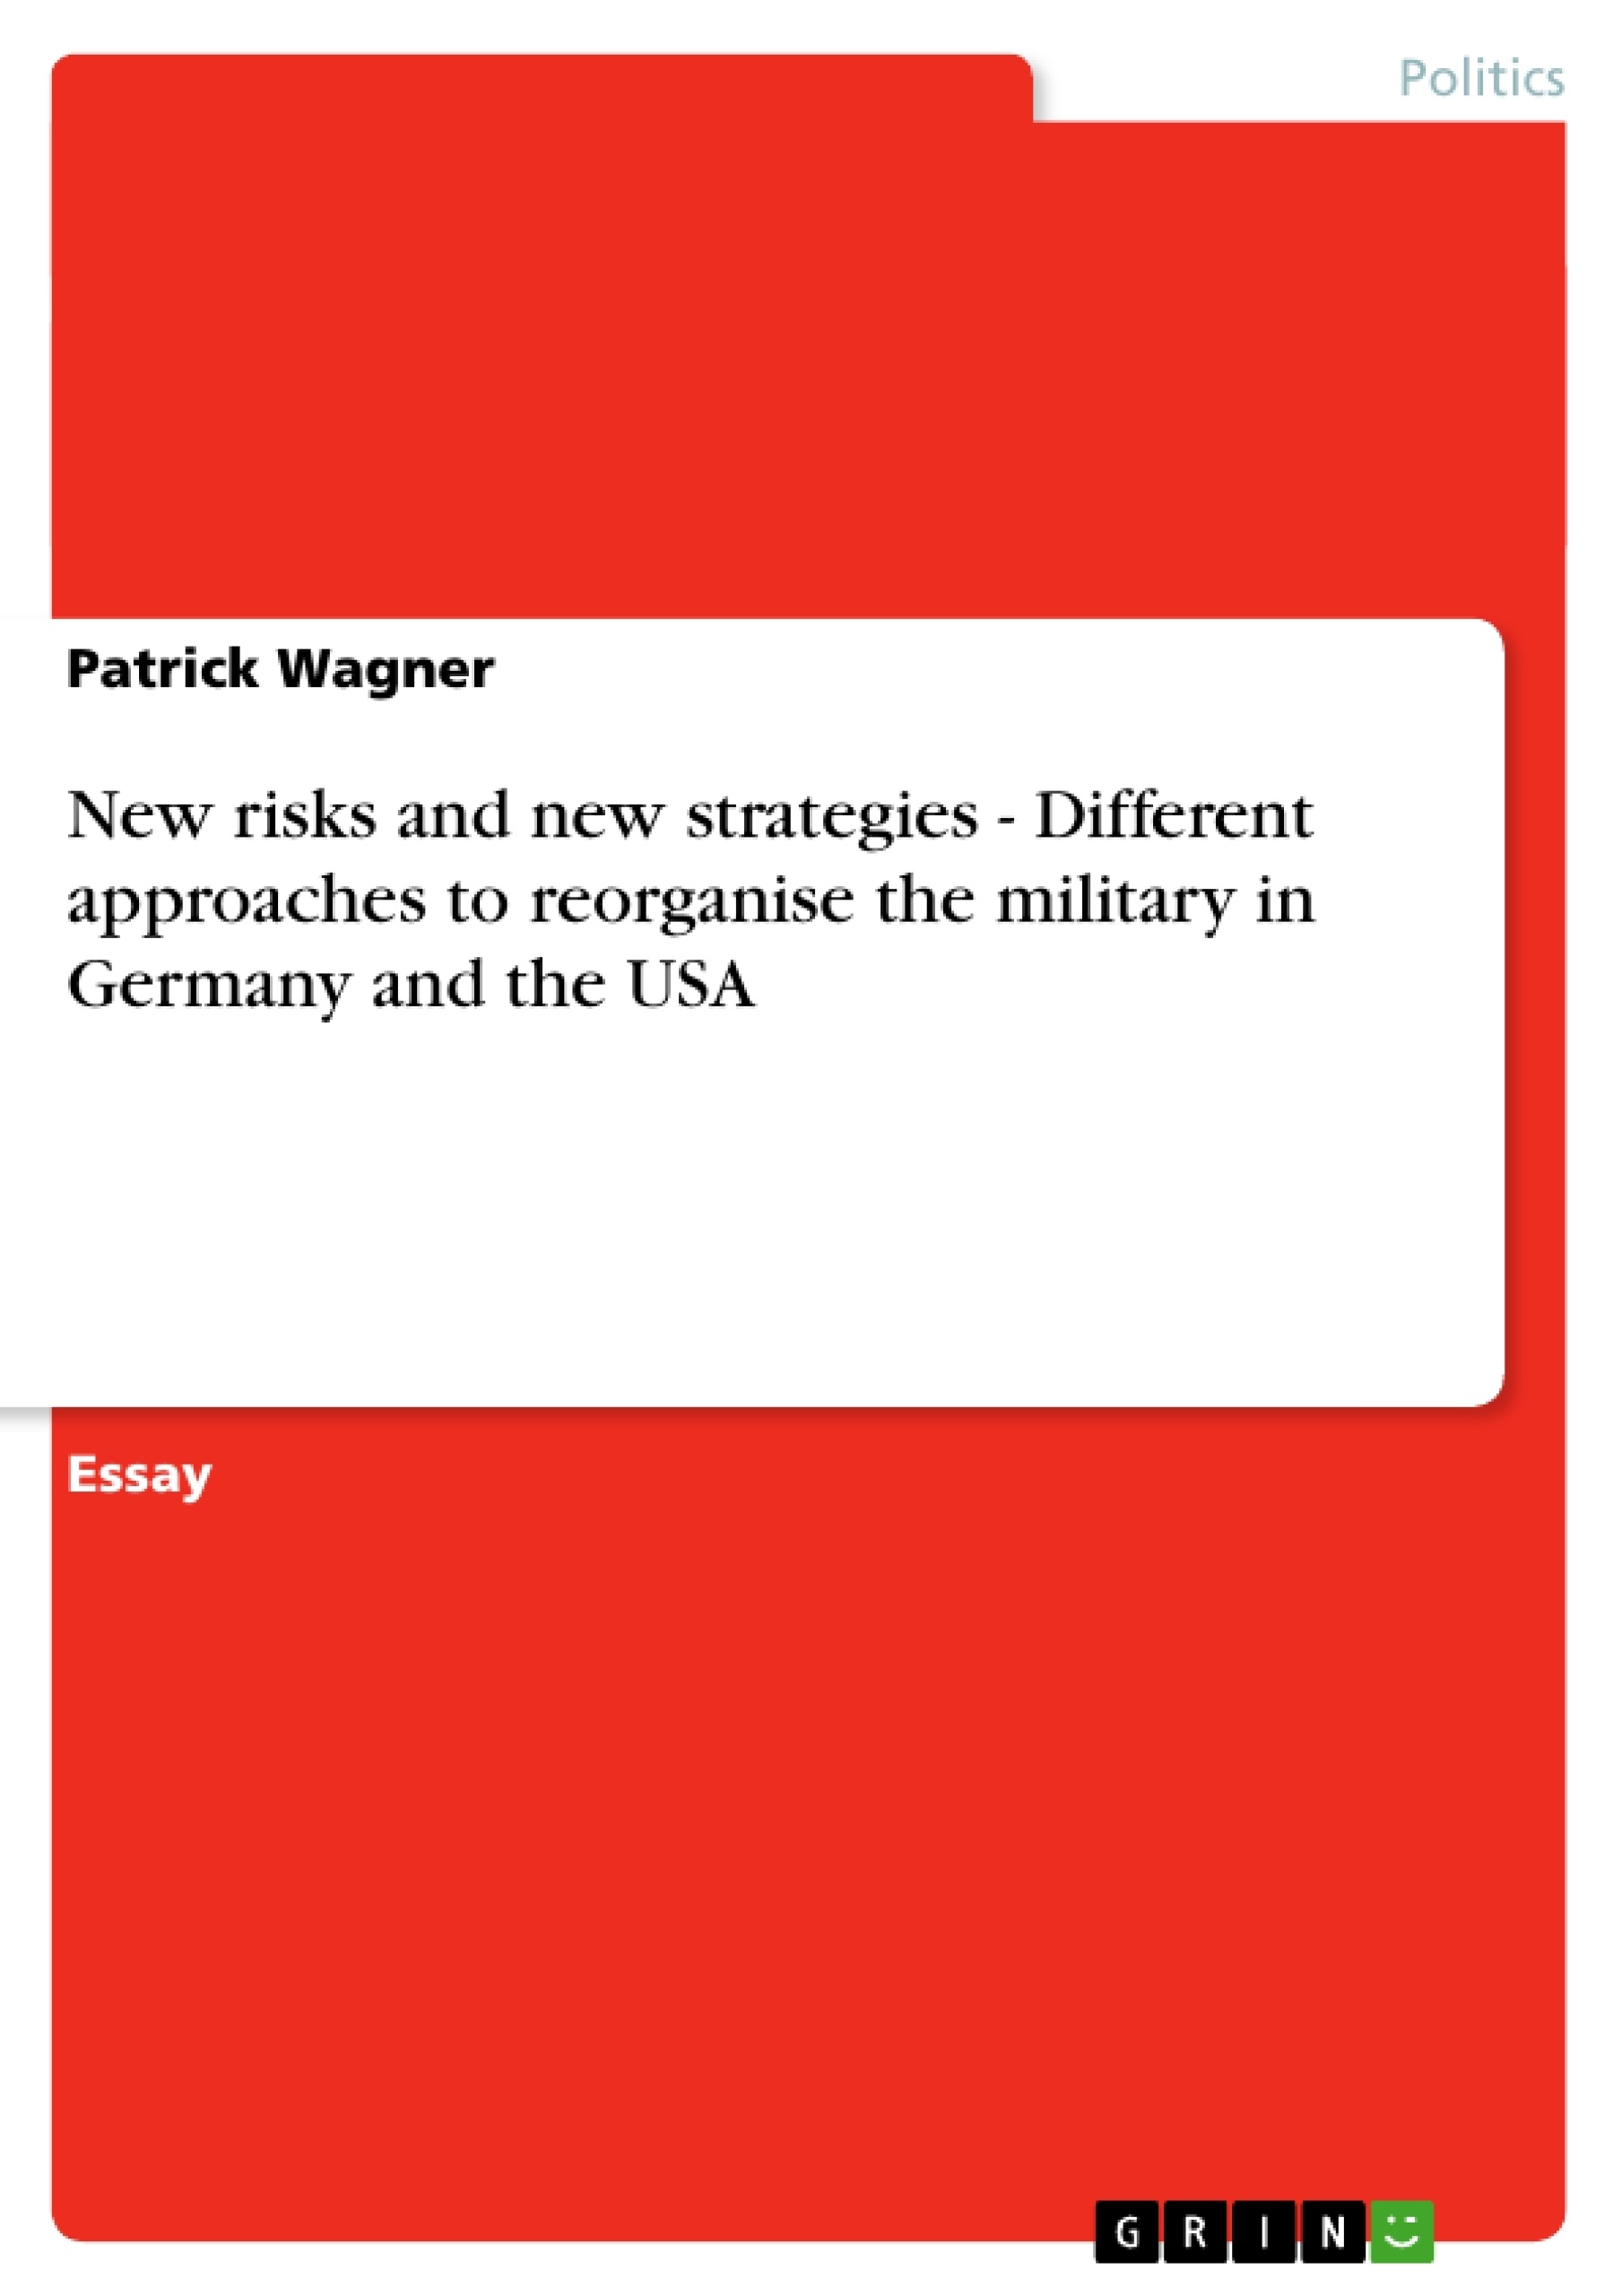 Title: New risks and new strategies - Different approaches to reorganise the military in Germany and the USA